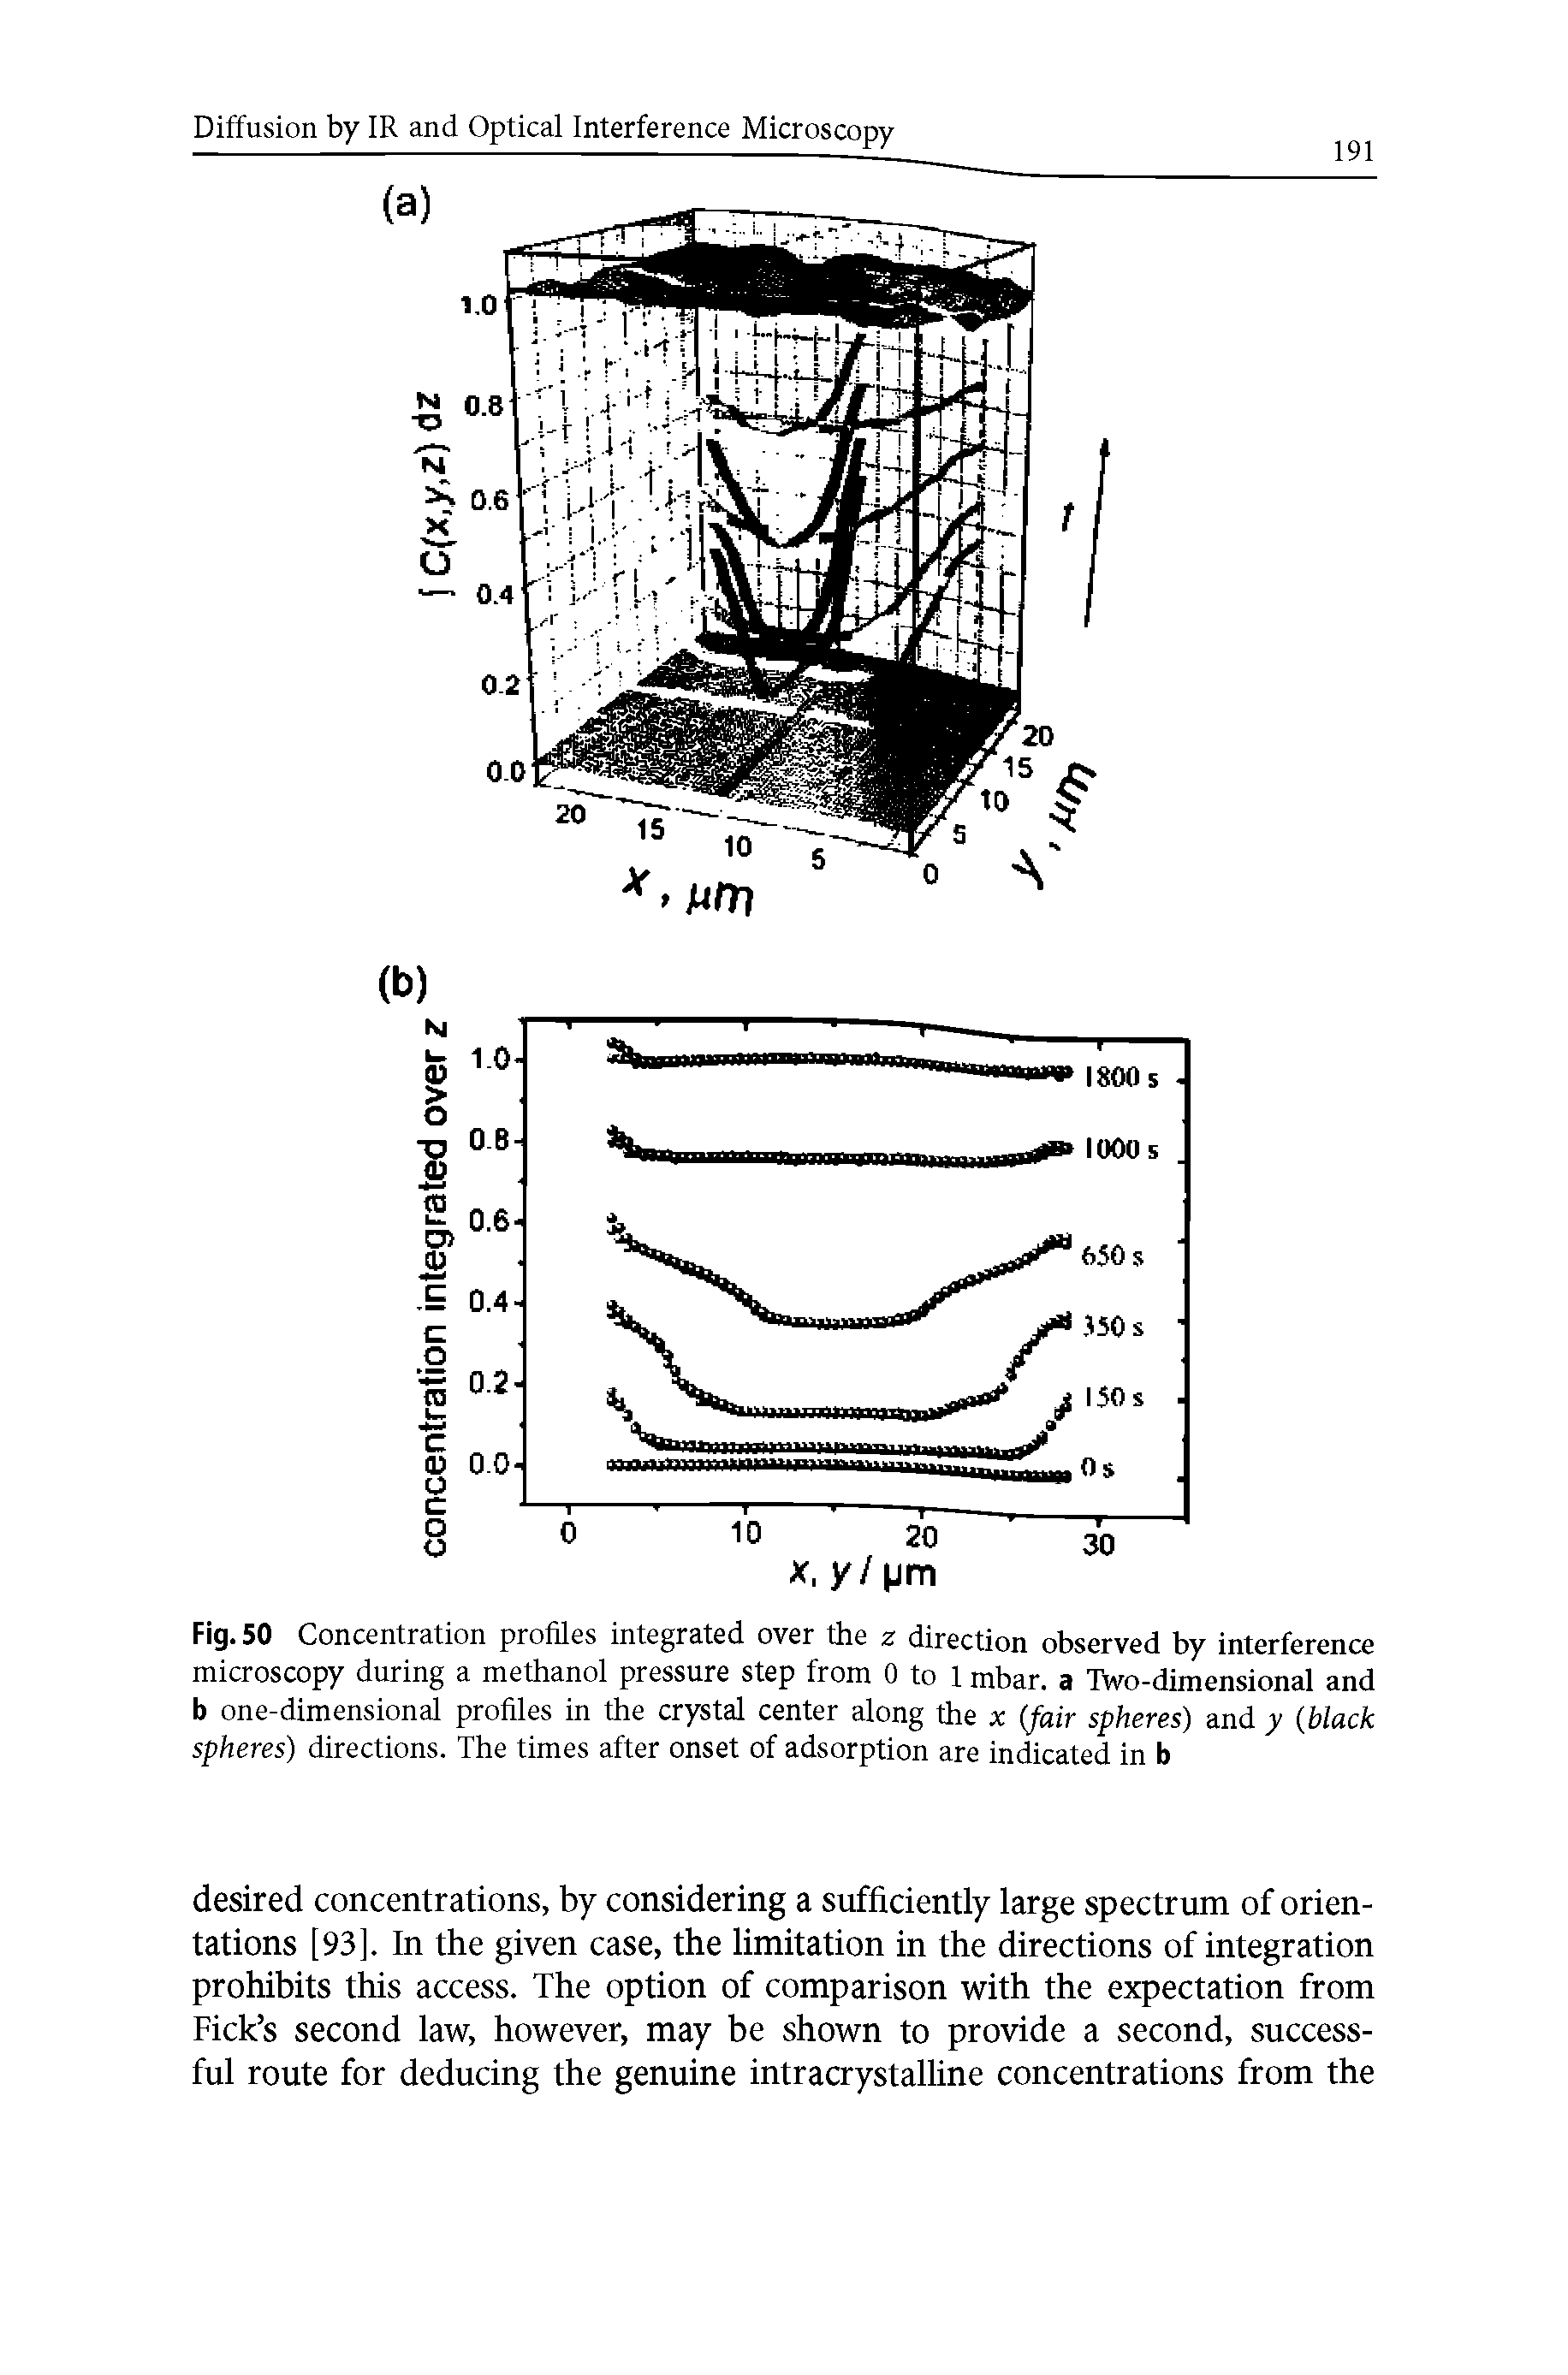 Fig. 50 Concentration profiles integrated over the z direction observed by interference microscopy during a methanol pressure step from 0 to 1 mbar. a Two-dimensional and b one-dimensional profiles in the crystal center along the x (fair spheres) and y (black spheres) directions. The times after onset of adsorption are indicated in b...